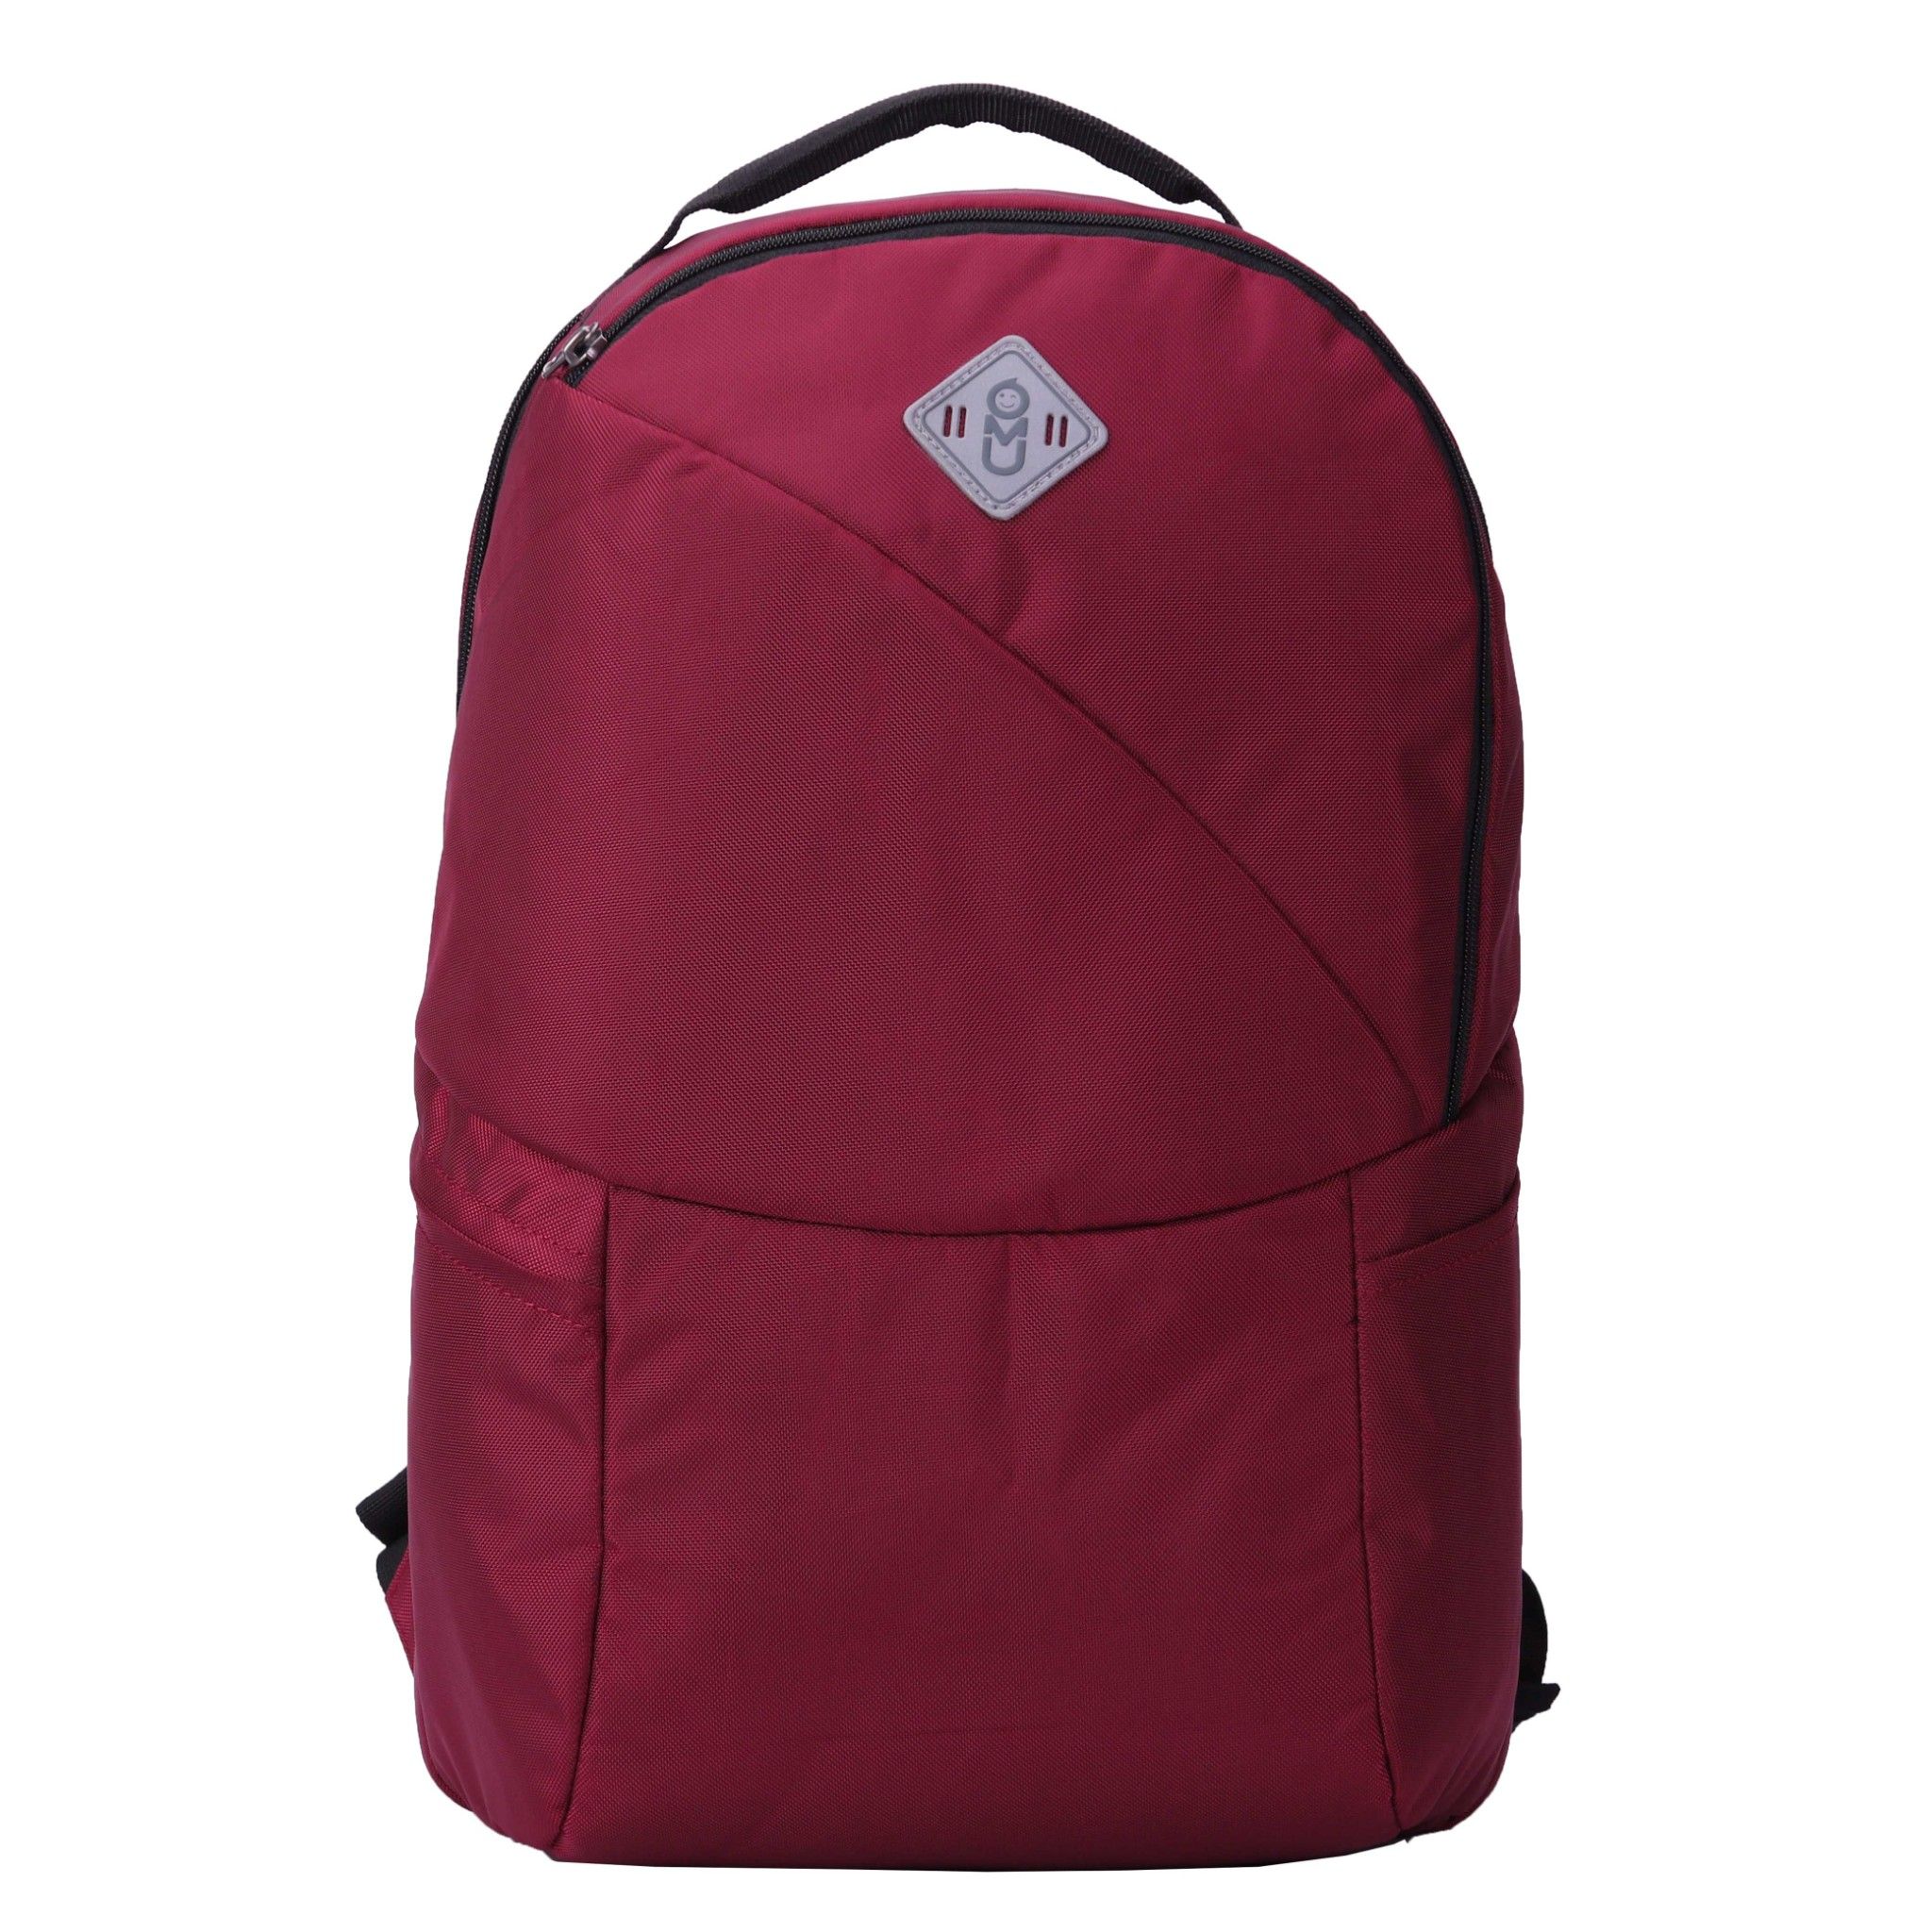  Balo UMO ENOW BackPack D.Red - Balo Laptop Cao Cấp 